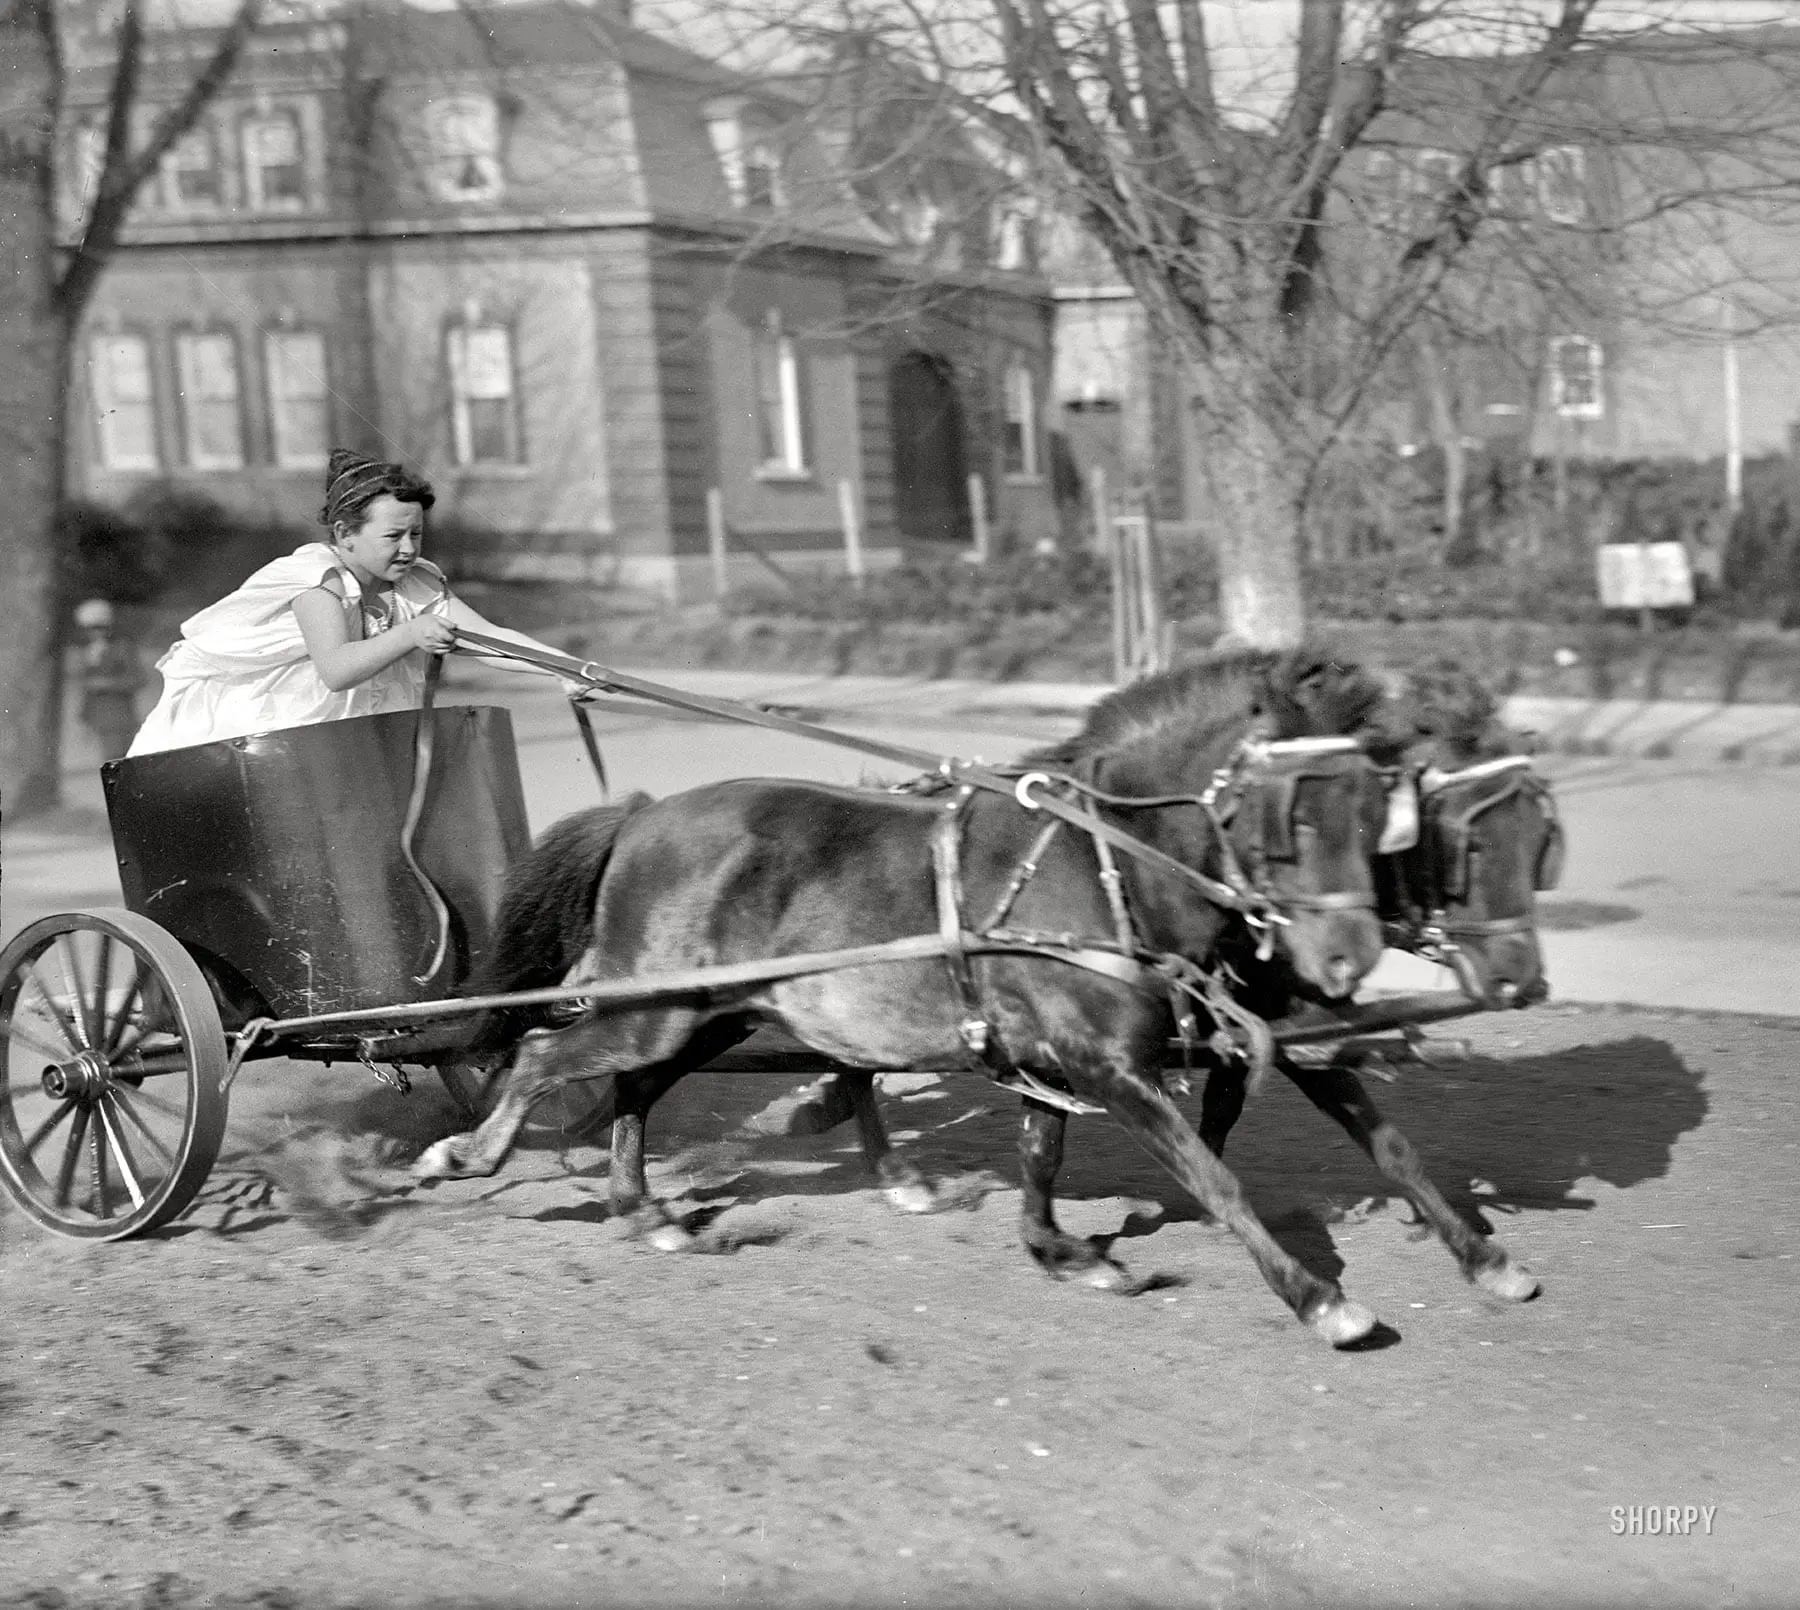 Washington, D.C., circa 1917. "Devereux child in chariot." Late for the toga party. Harris & Ewing Collection glass negative. (Shorpy)